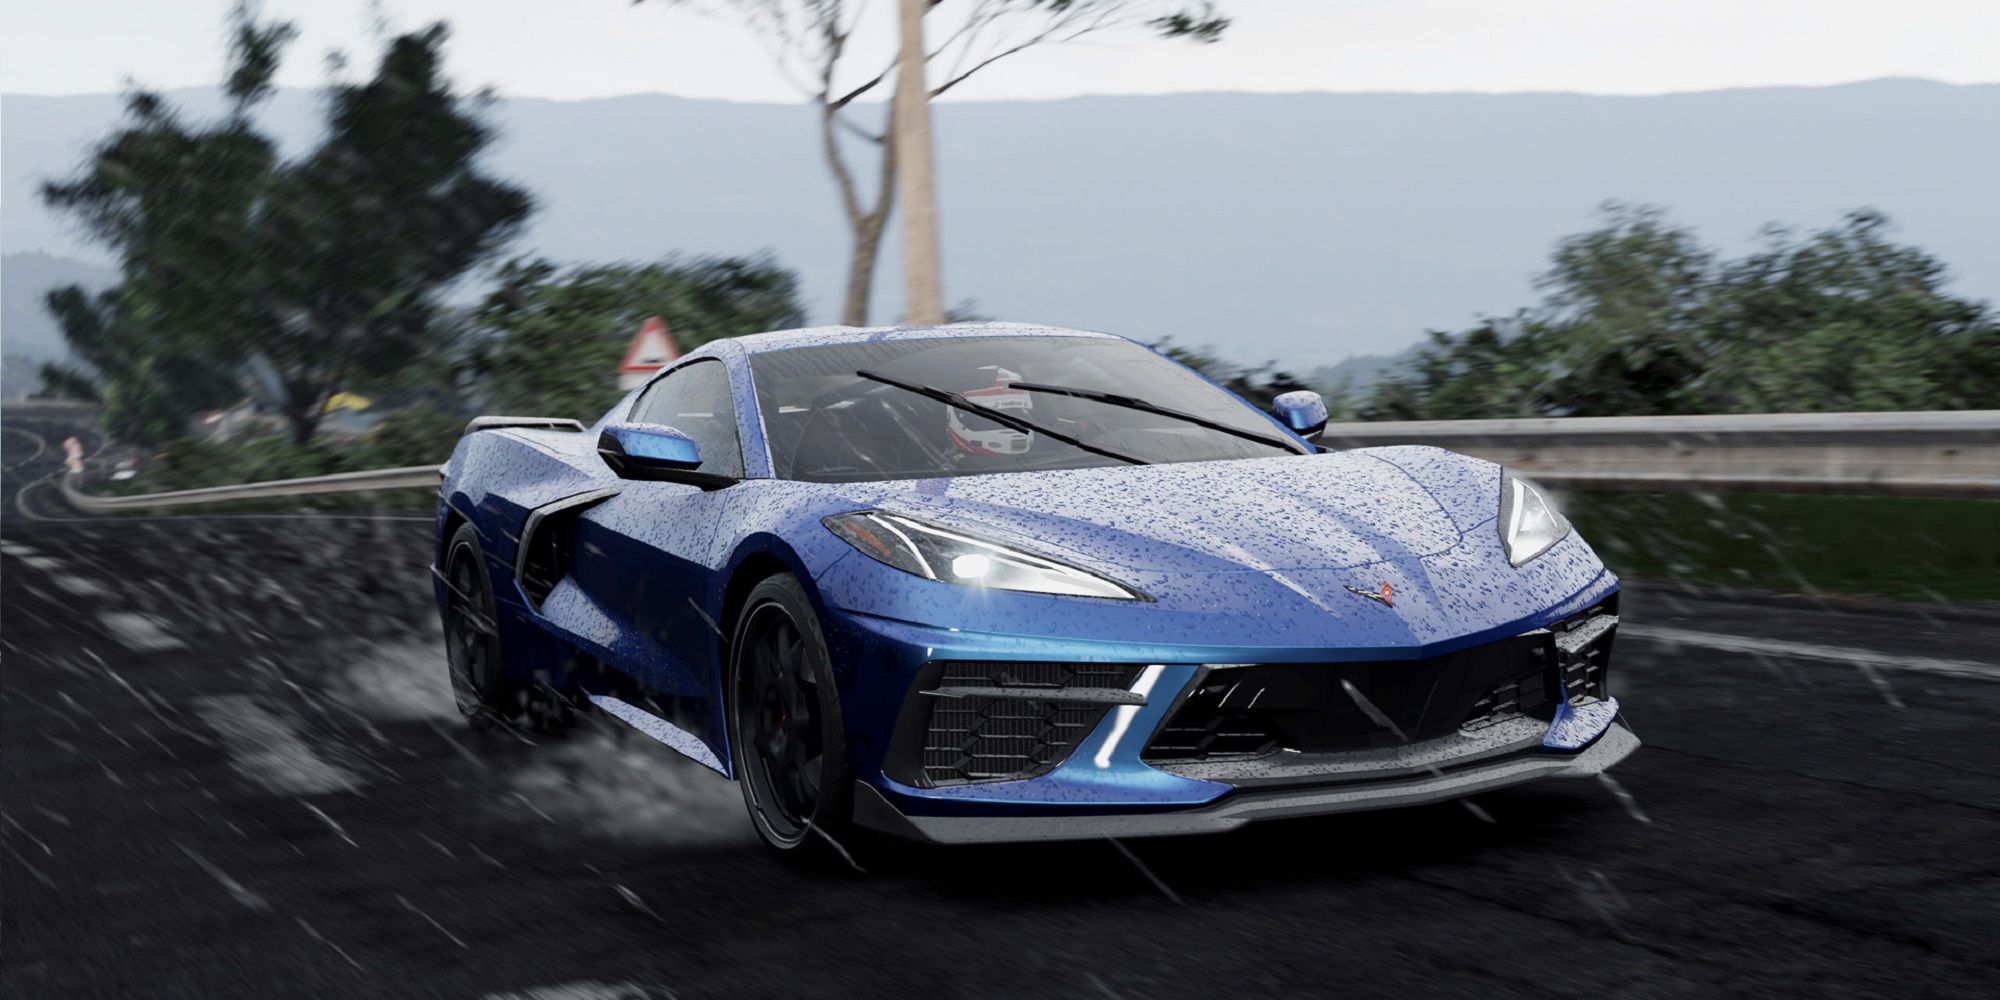 Project Cars 3 in-game screenshot showing a blue Chevrolet Corvette